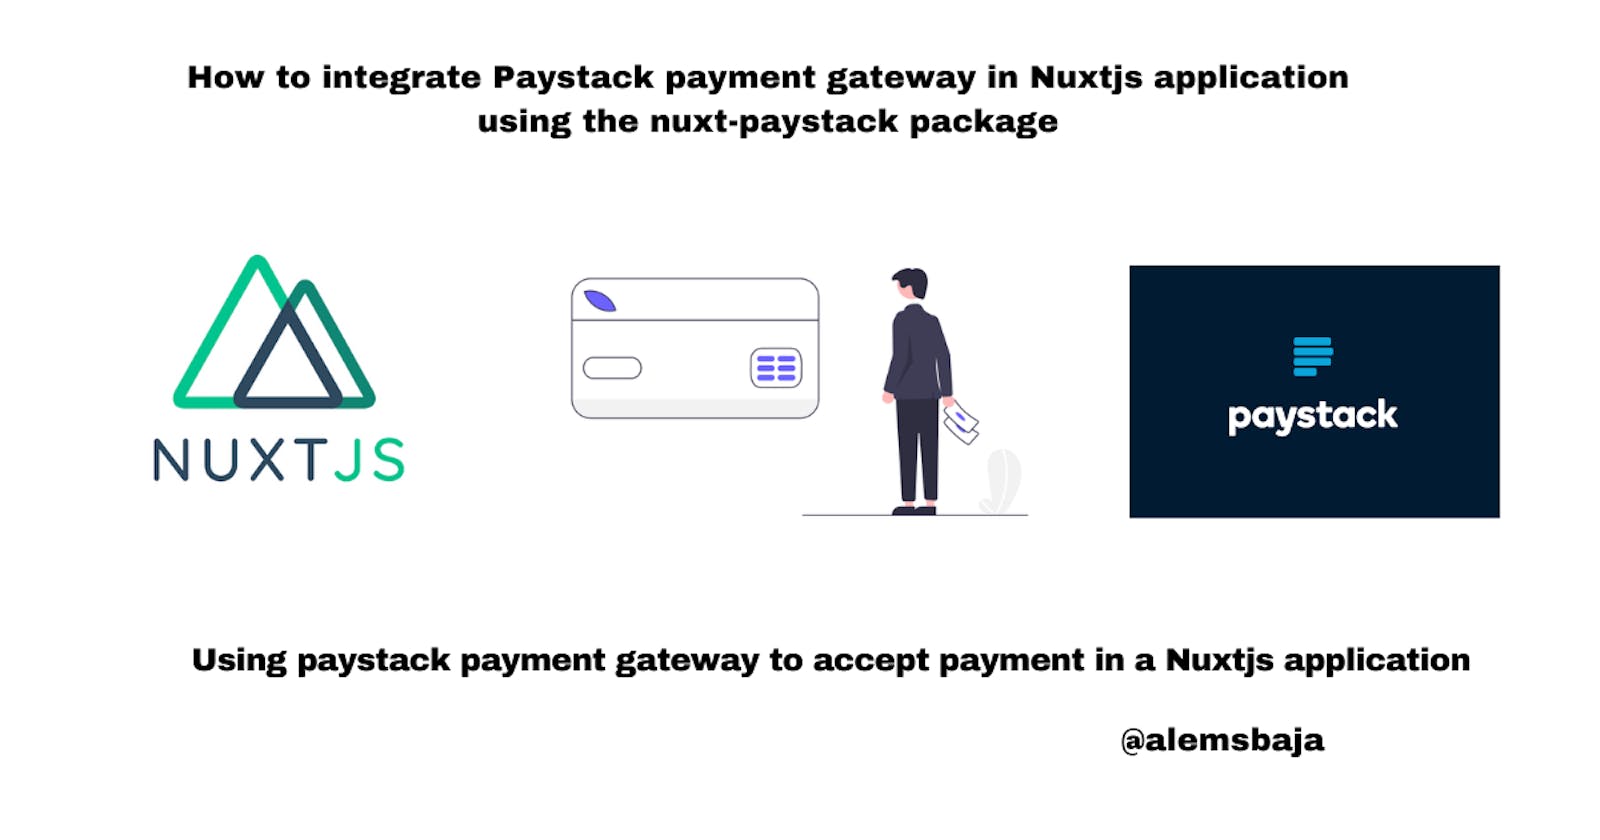 How to integrate Paystack payment gateway in Nuxtjs application using the nuxt-paystack package